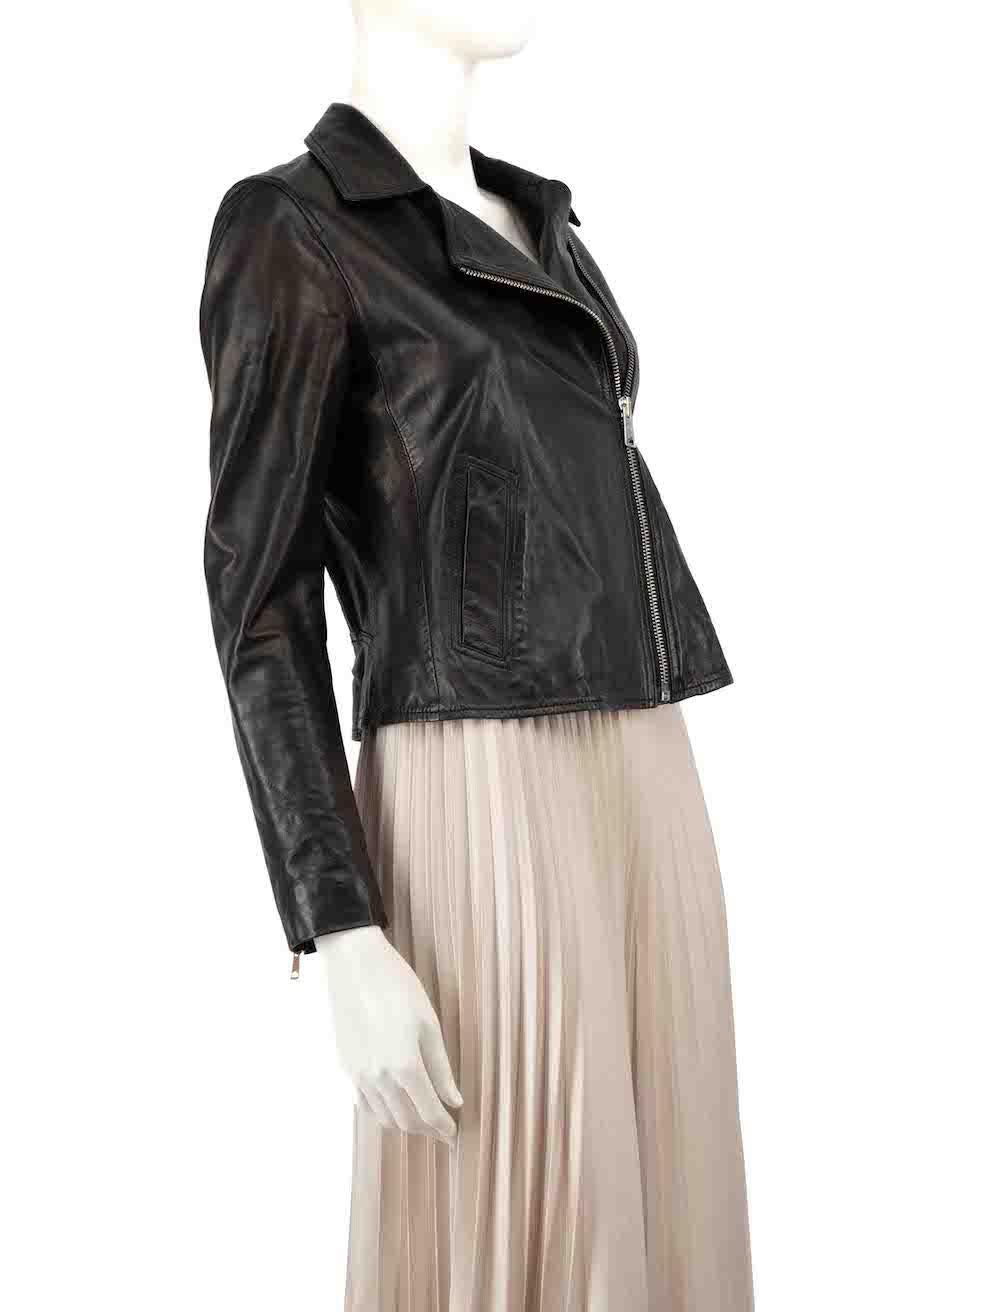 CONDITION is Very good. Minimal wear to jacket is evident. Minimal wear to right side sleeve with marks to the lather near the shoulder on this used All Saints designer resale item.
 
 
 
 Details
 
 
 Black
 
 Leather
 
 Jacket
 
 Asymmetric zip